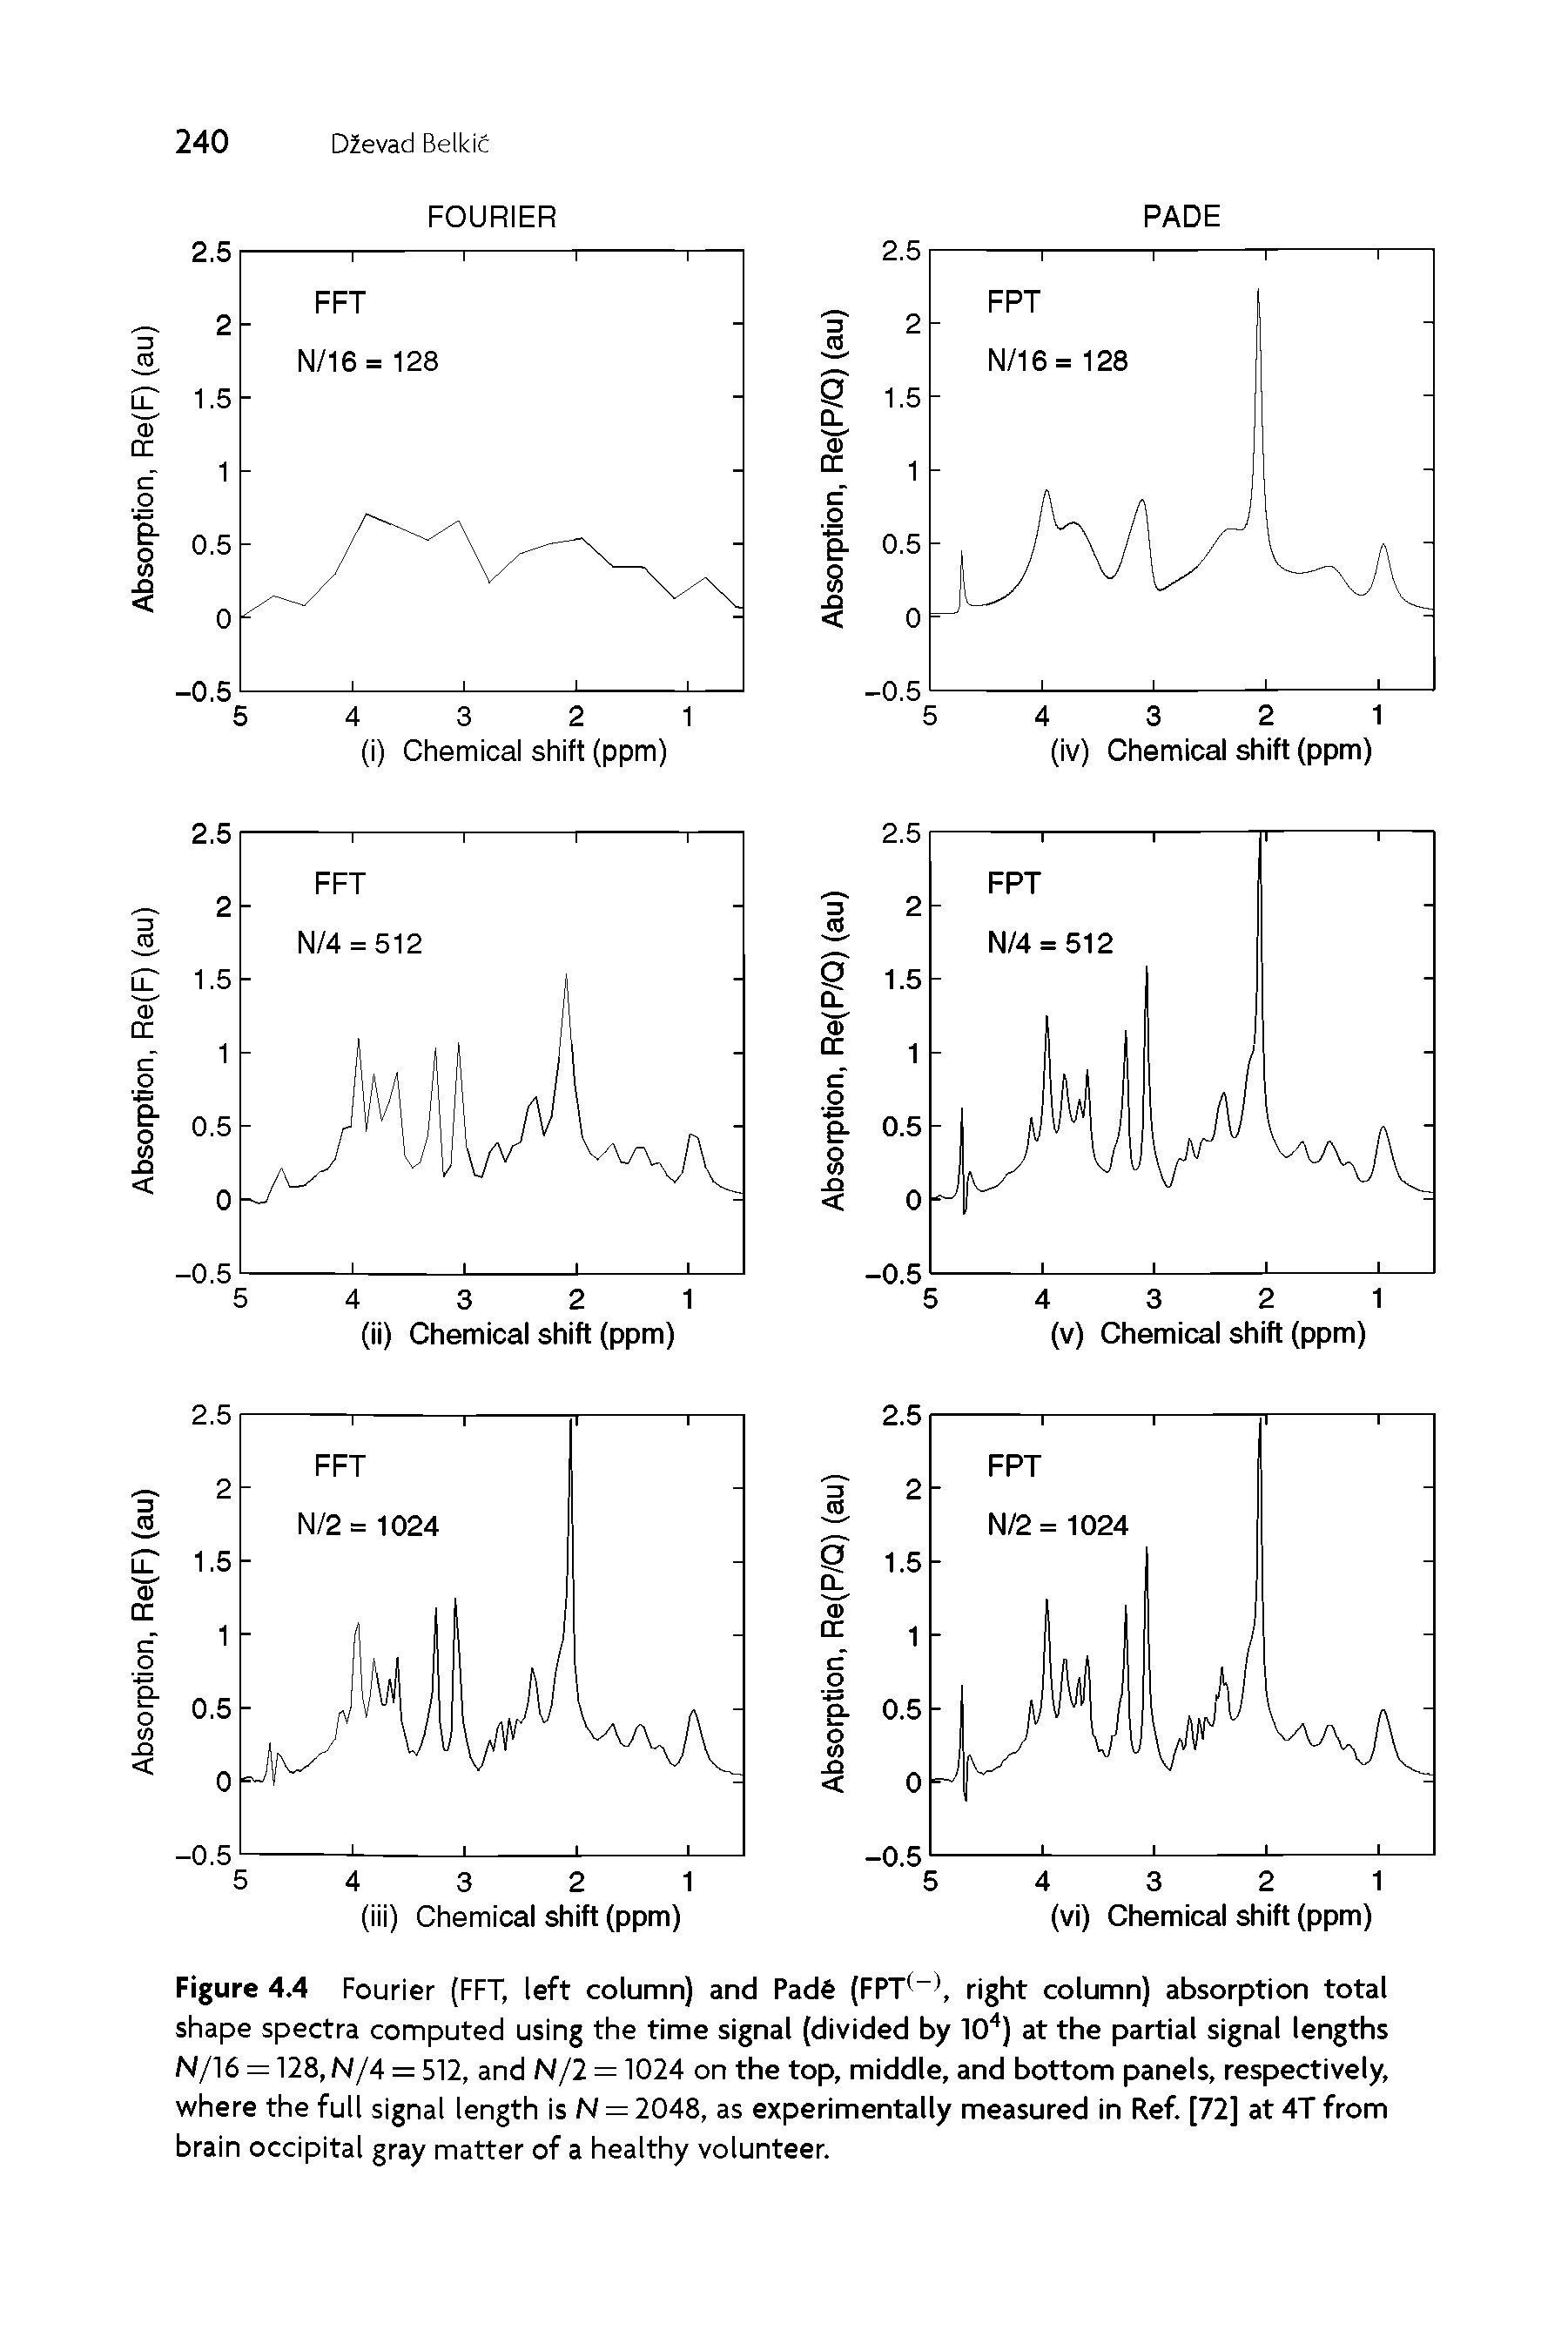 Figure 4.4 Fourier (FFT, left column) and Pad (FPT(, right column) absorption total shape spectra computed using the time signal (divided by TO4) at the partial signal lengths N/16 = 128, N/4 = 512, and N/2 = 1024 on the top, middle, and bottom panels, respectively, where the full signal length is N = 2048, as experimentally measured in Ref. [72] at 4T from brain occipital gray matter of a healthy volunteer.